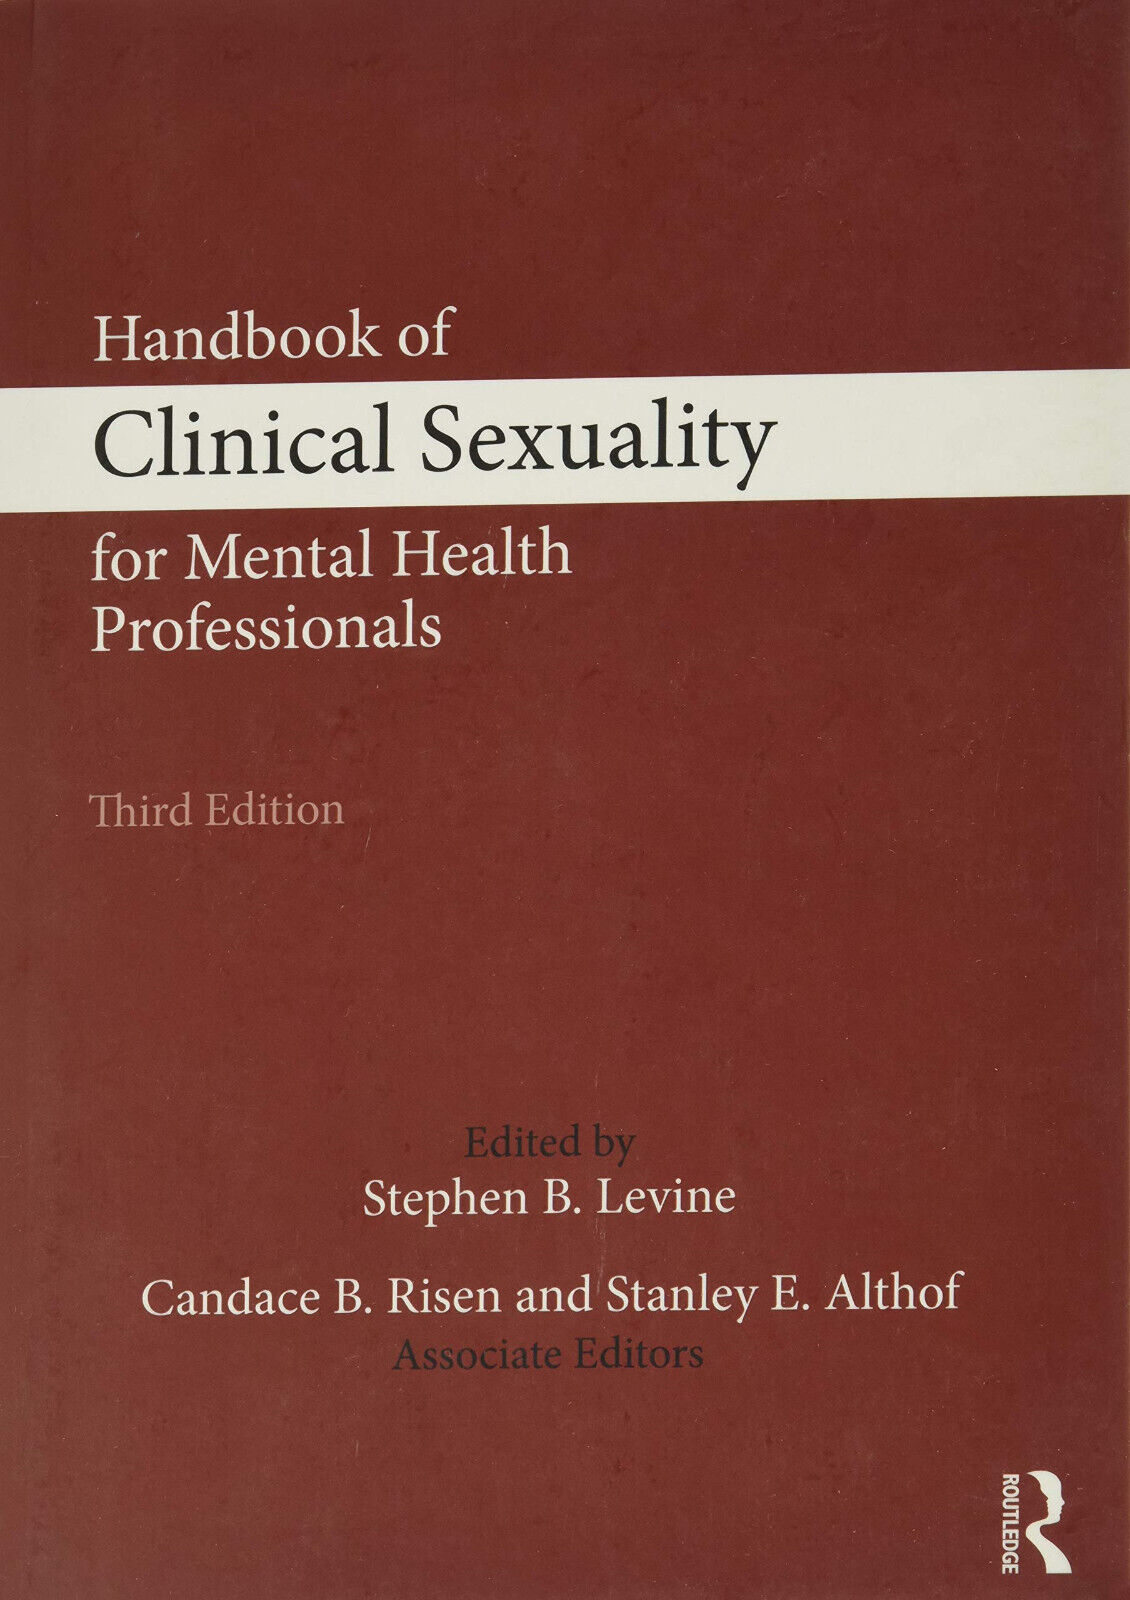 Handbook of Clinical Sexuality for Mental Health Professionals - Routledge, 2016